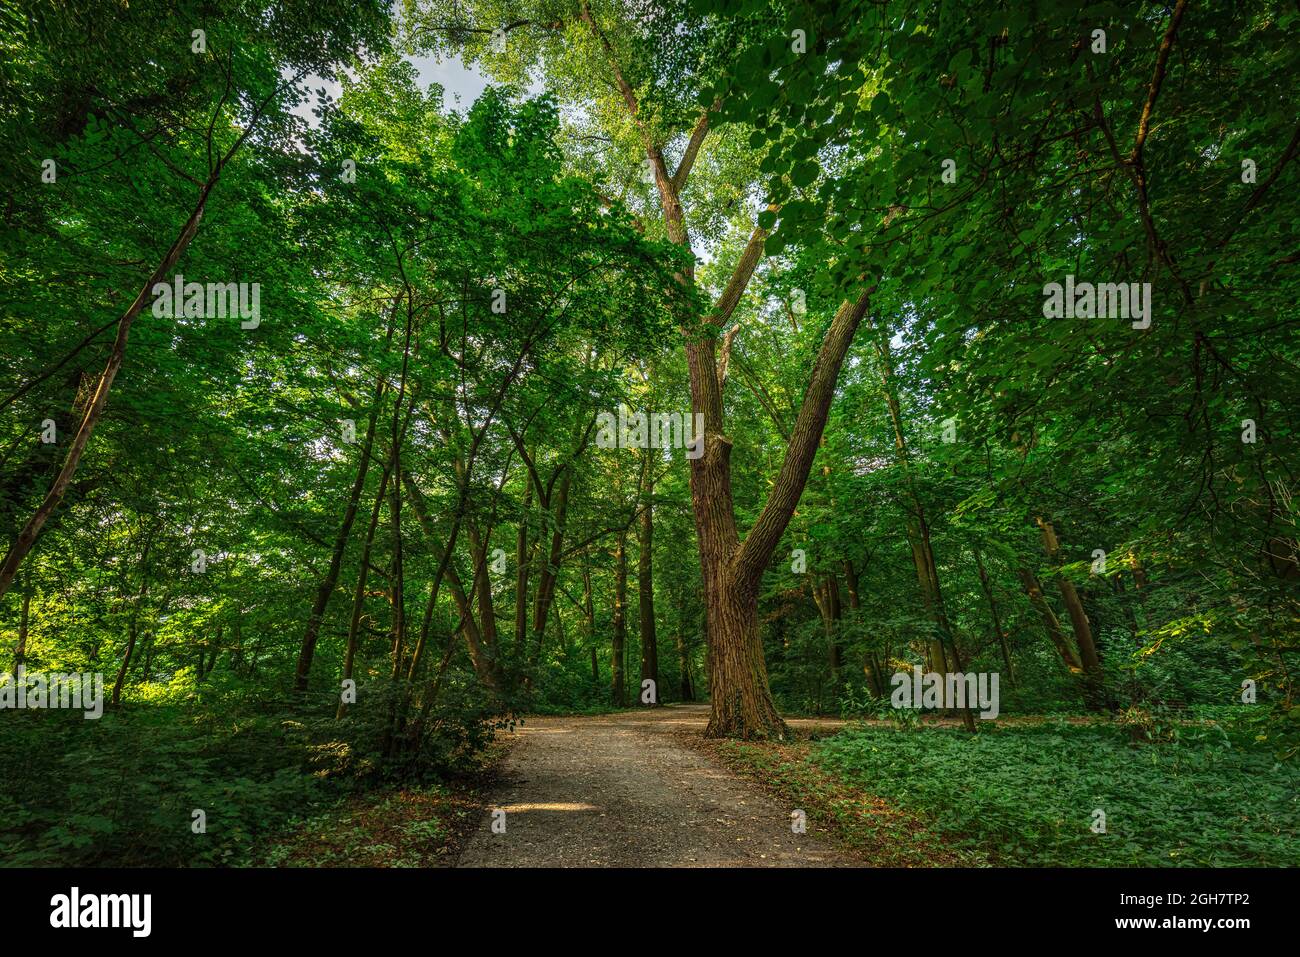 Beautiful park with green trees and an unpaved road in Opole, Poland Stock Photo